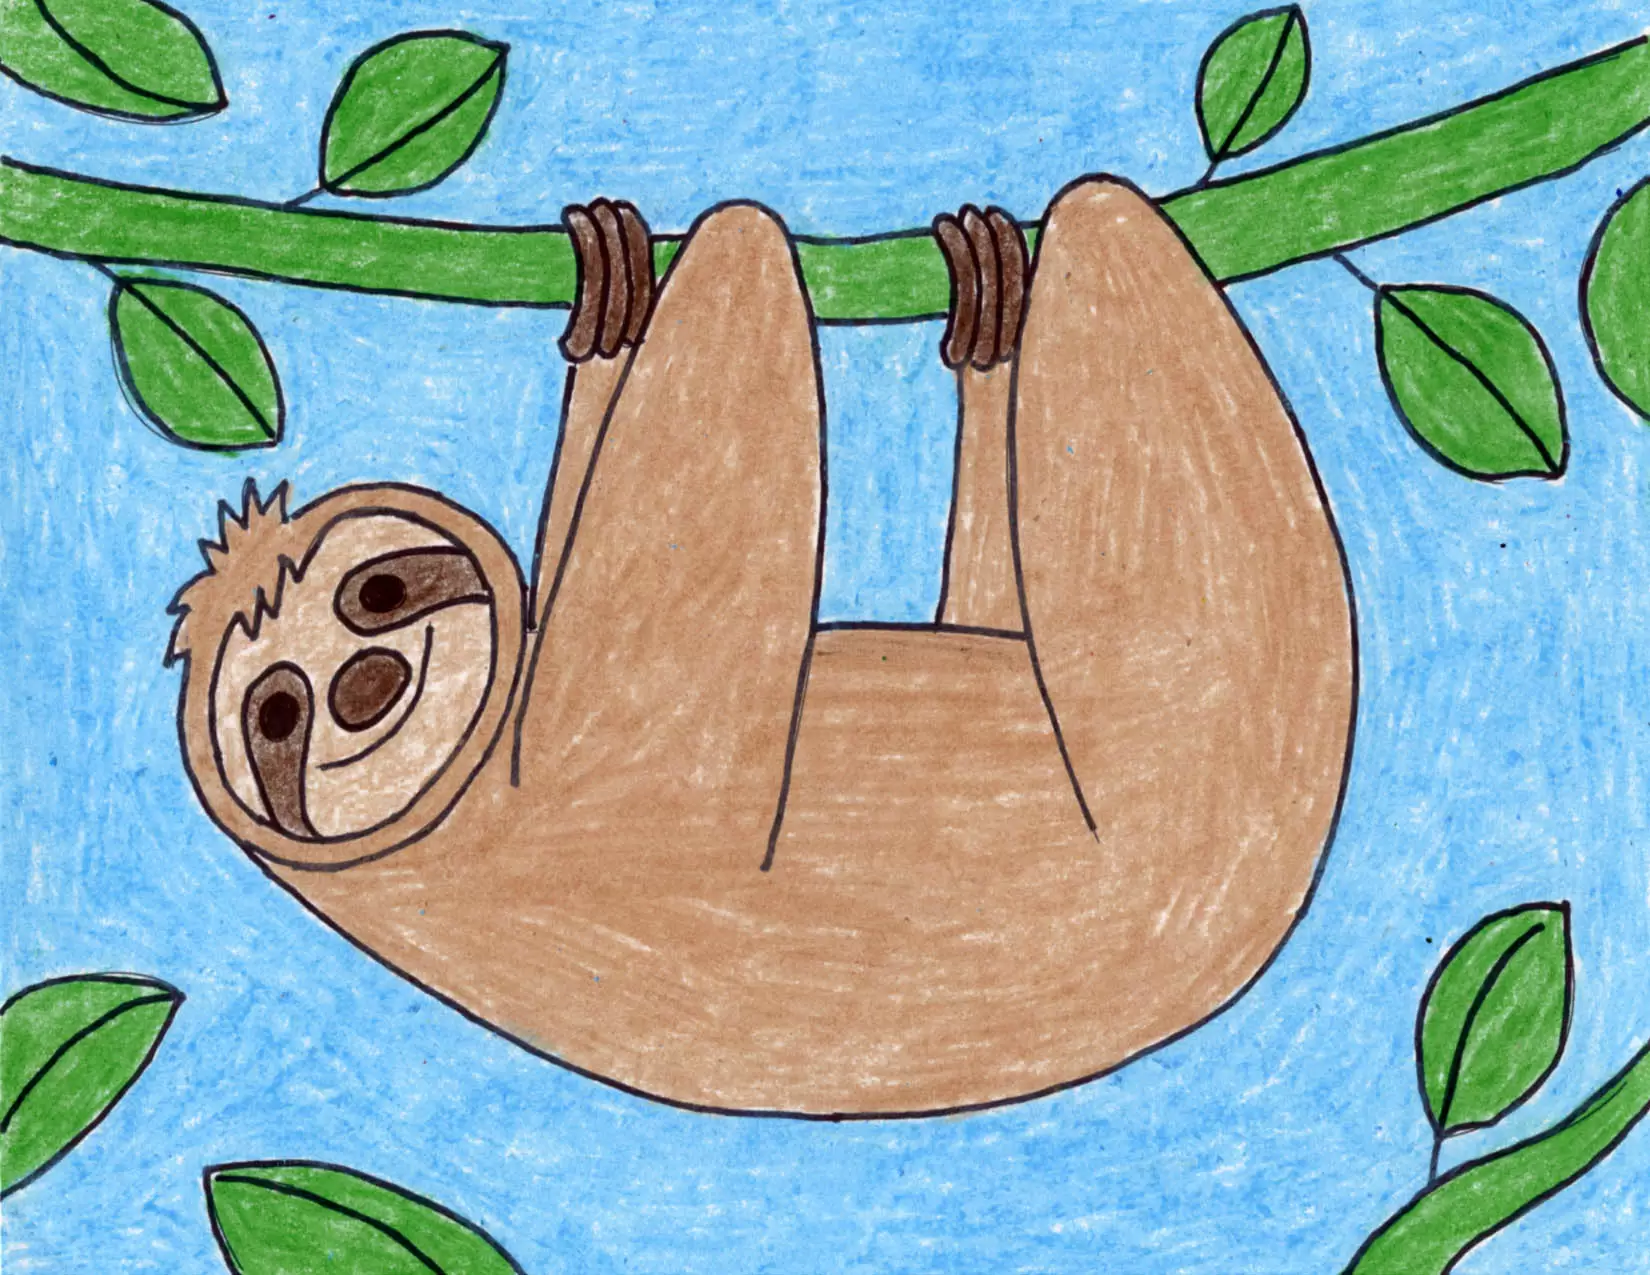 Easy How to Draw a Sloth Tutorial Video and Sloth Coloring Page